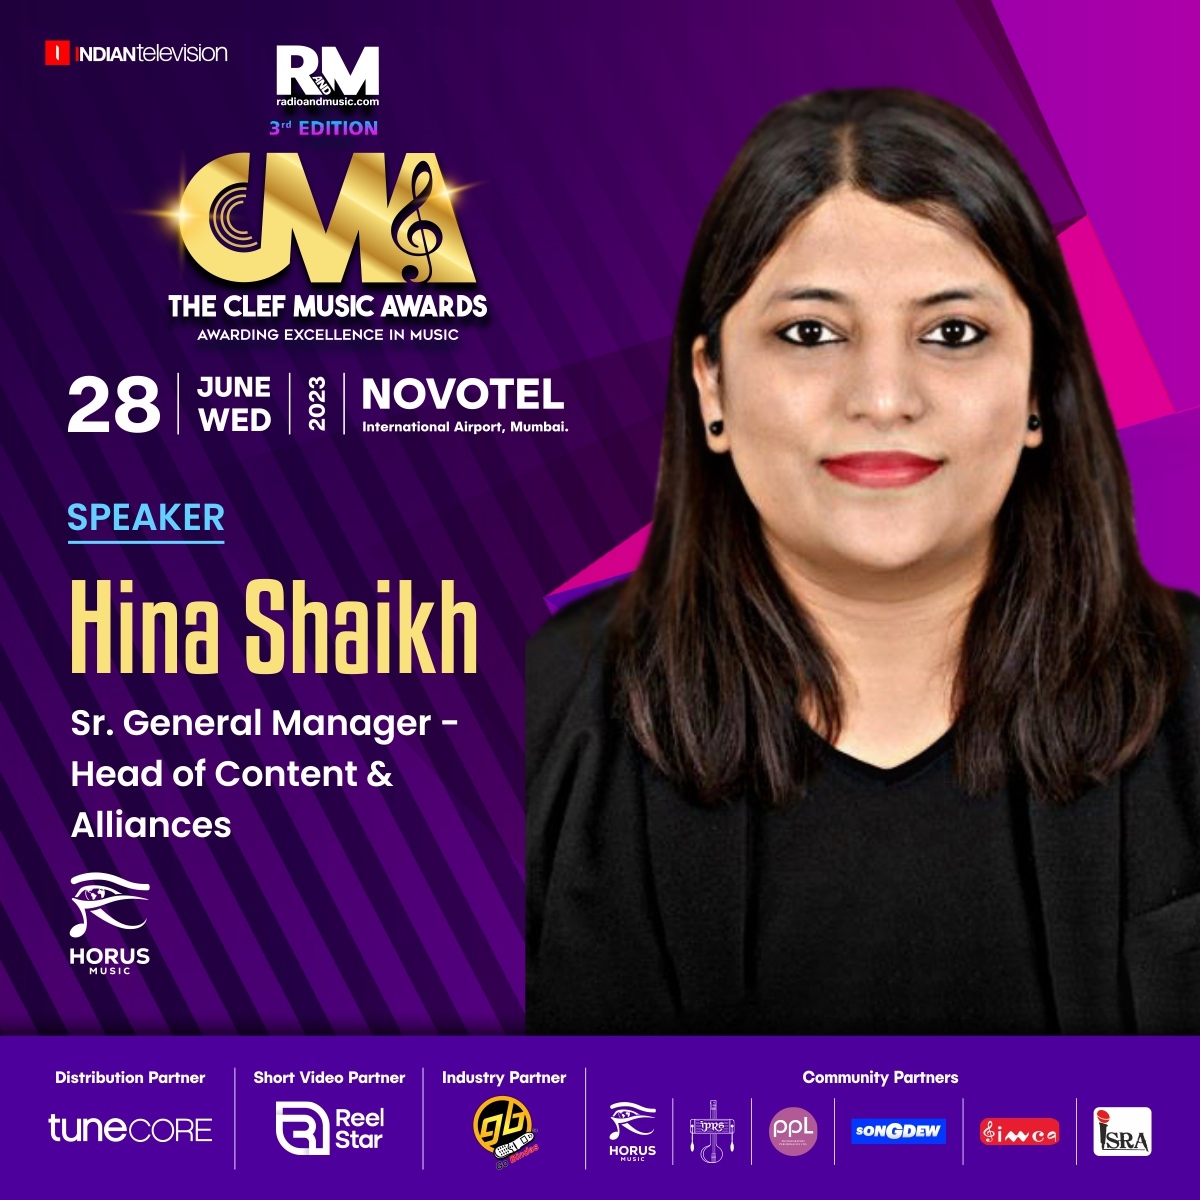 Our Senior General Manager and Head of Content & Alliances Hina will be a judge for this years @radioandmusic Clef Music Awards. Hina will also be participating on the panel ‘Indie Music scene at it’s best’, 28th of June, 6 pm.

#CMA2023 #ClefMusicAwards2023 #horusmusicindia